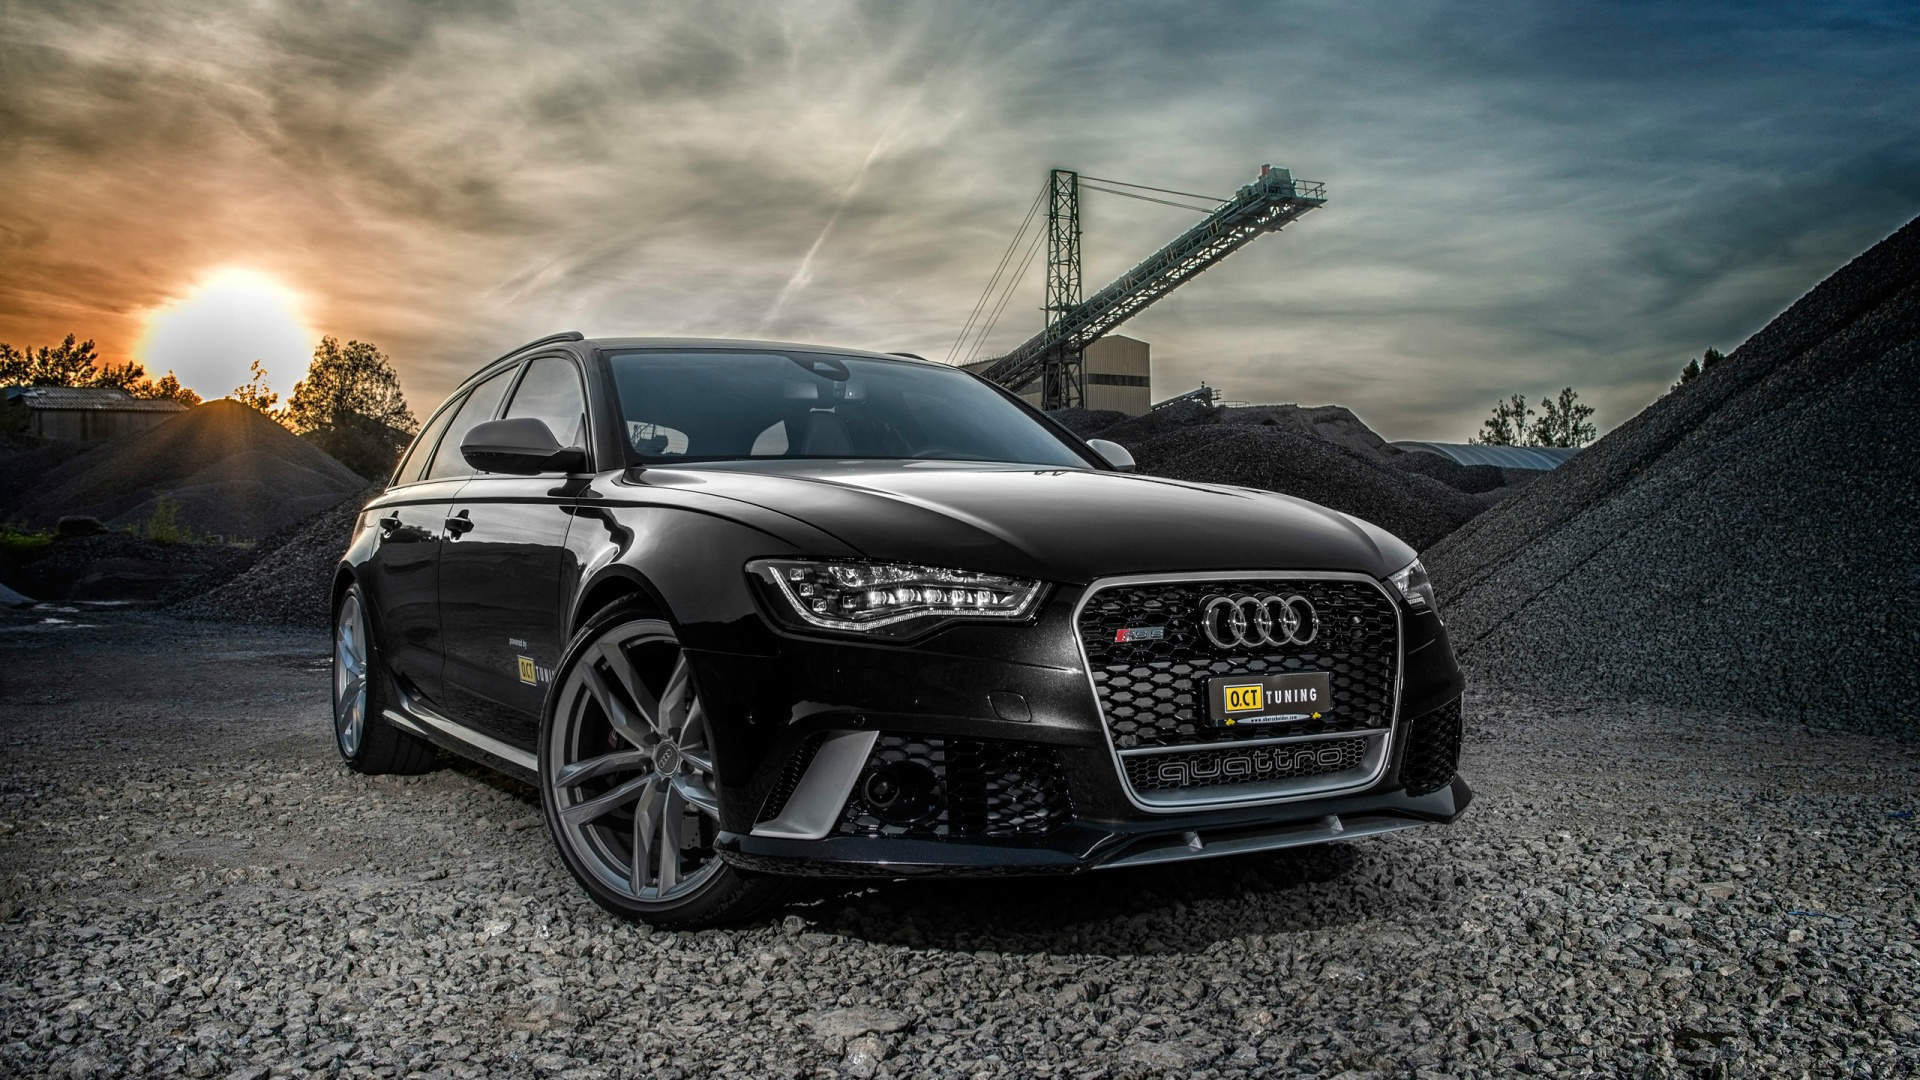 Picture 2016, Audi RS6 OCT Tuning Hd Car Wallpaper - Cars, Images ...